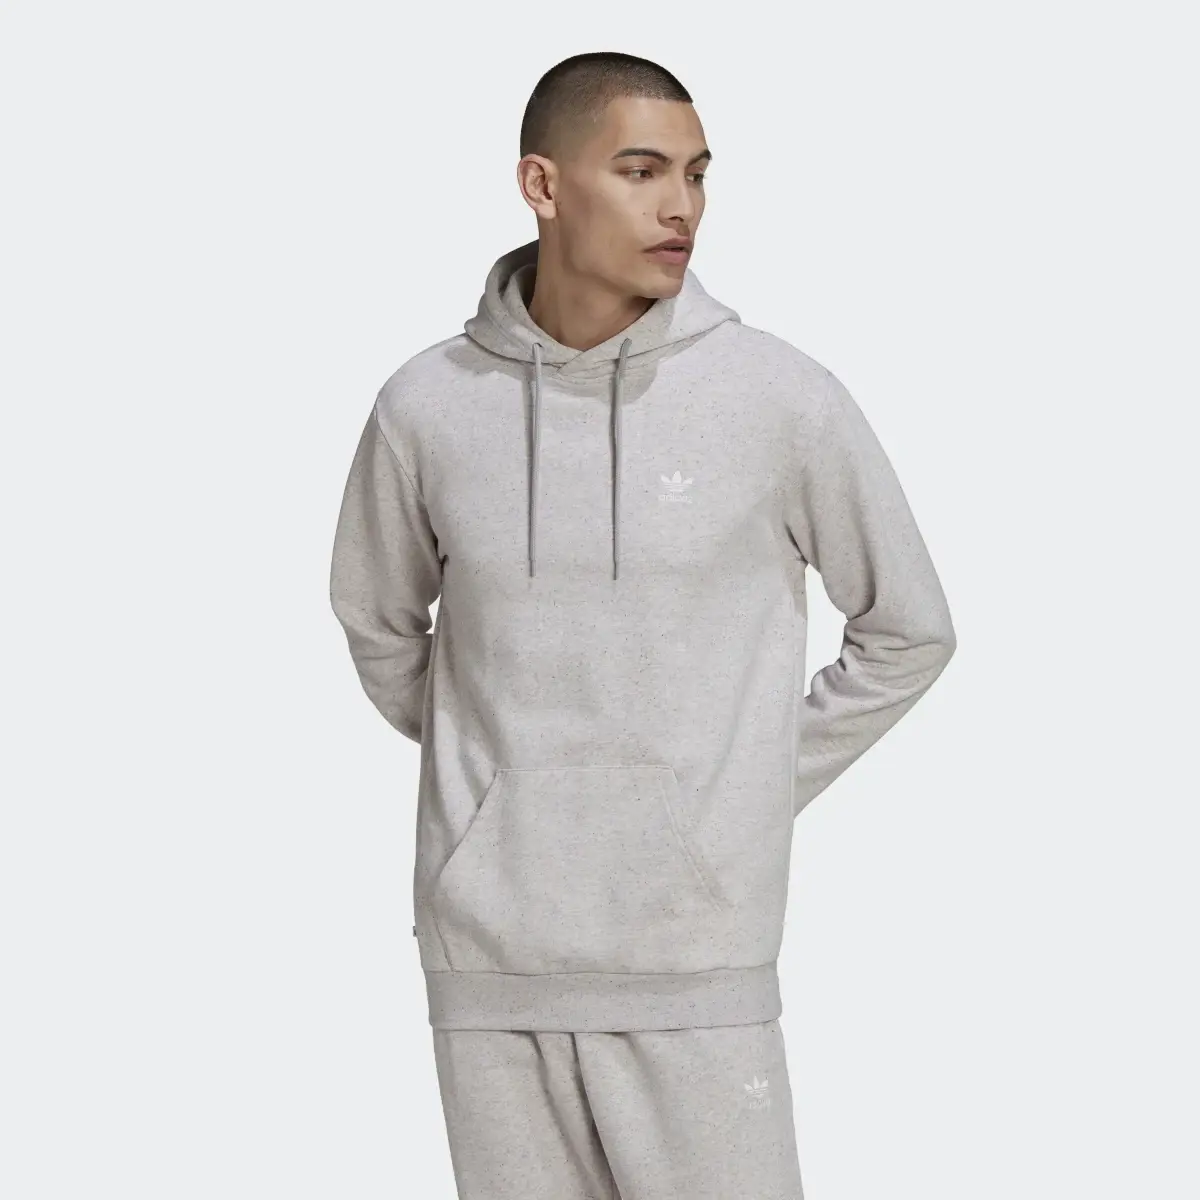 Adidas Essentials+ Made with Nature Hoodie. 2